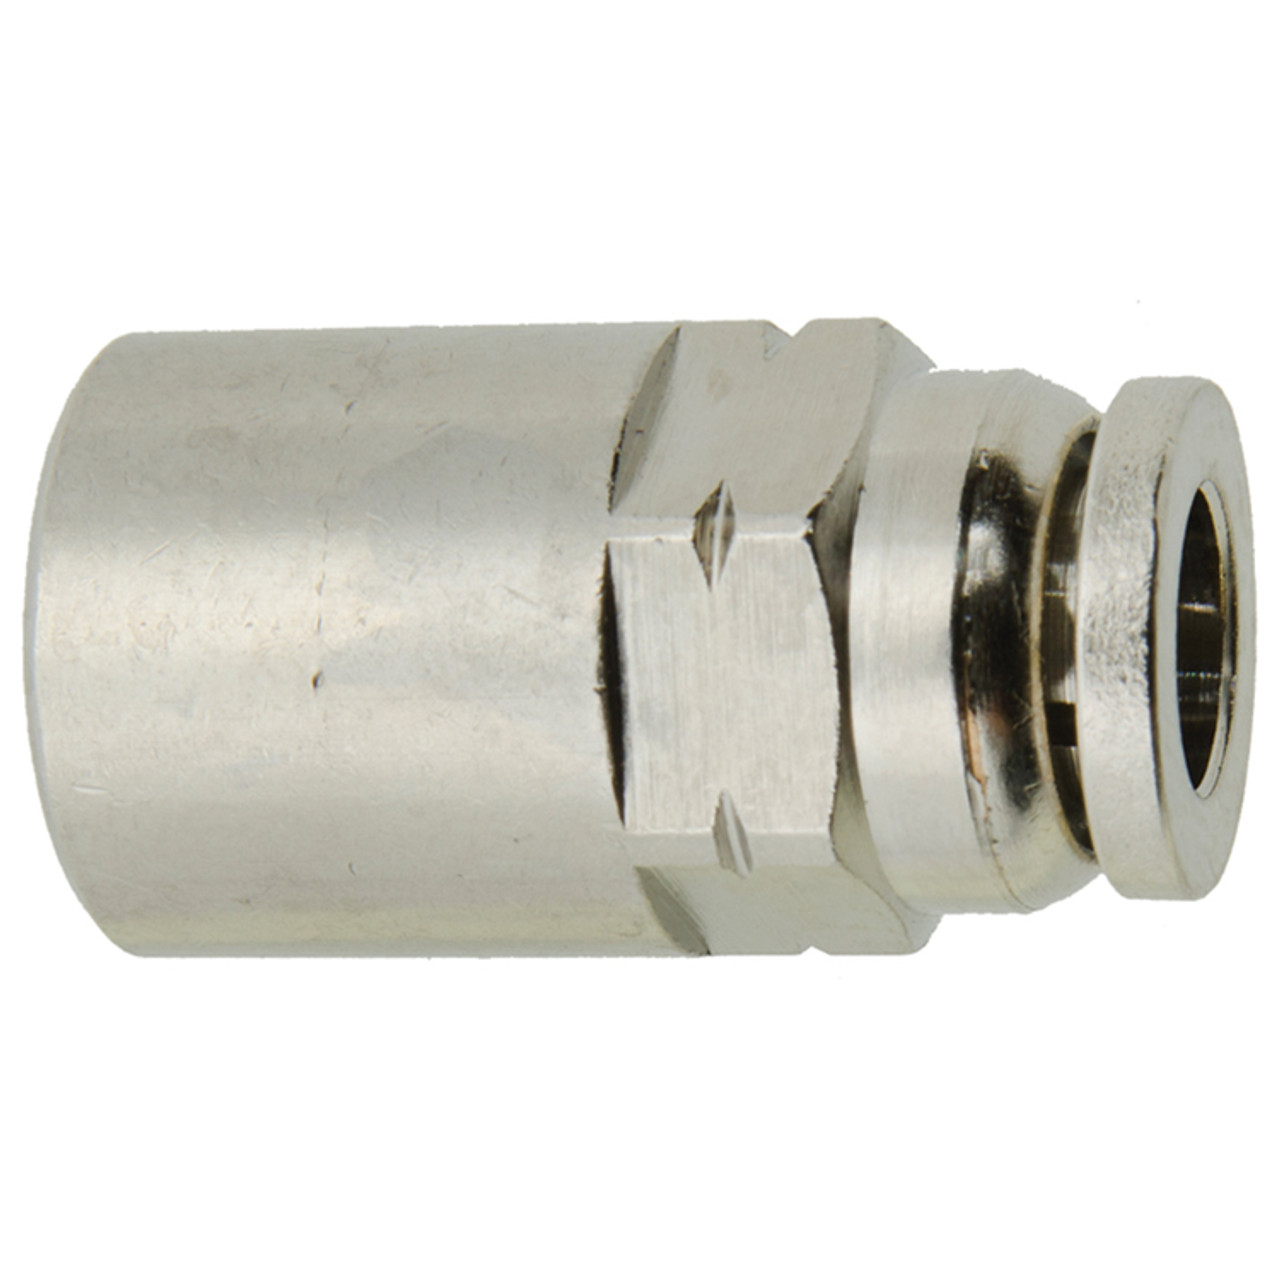 1/4 x 1/4" Nickel Plated Brass Female NPT - Push-To-Connect   G6008P-04-04